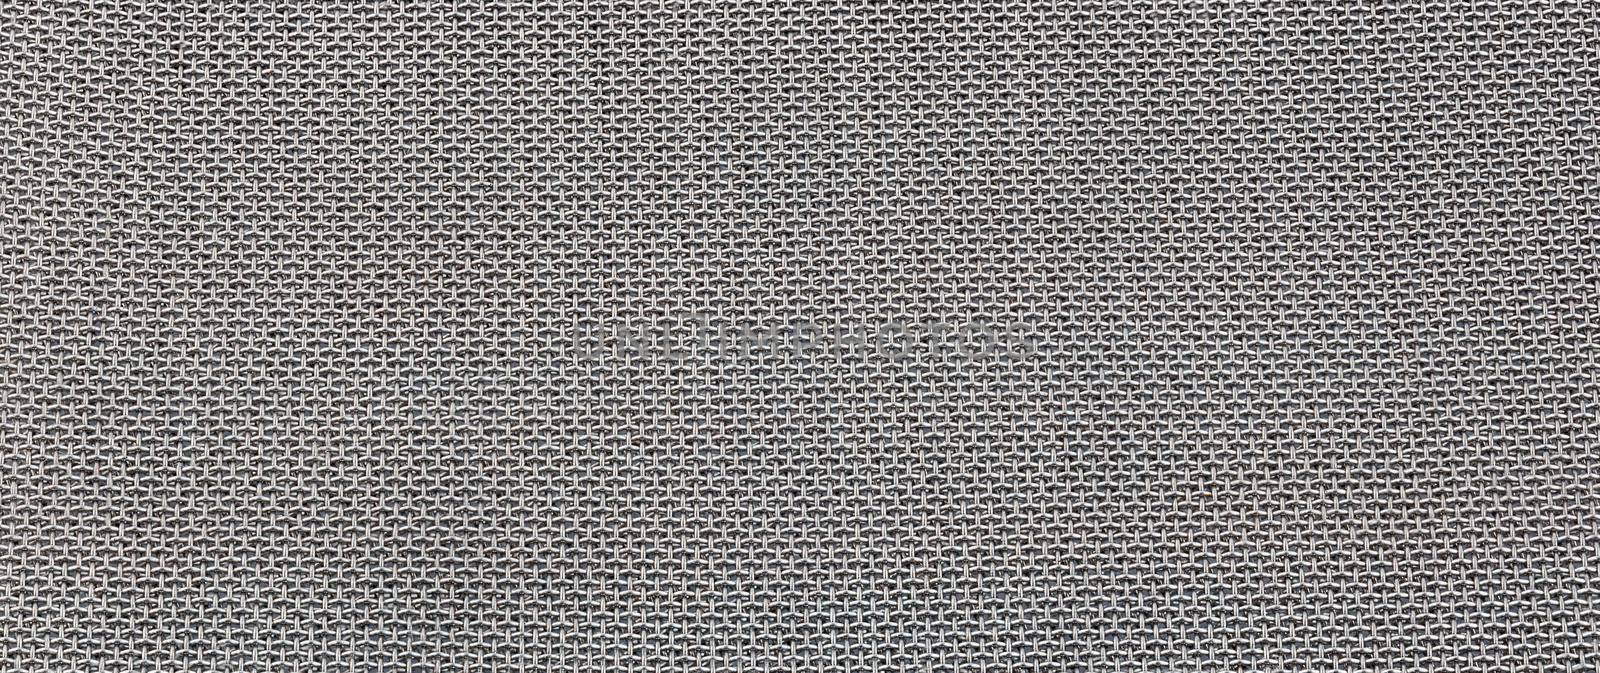 flat tiny double layered stainless steel grid - macro background.